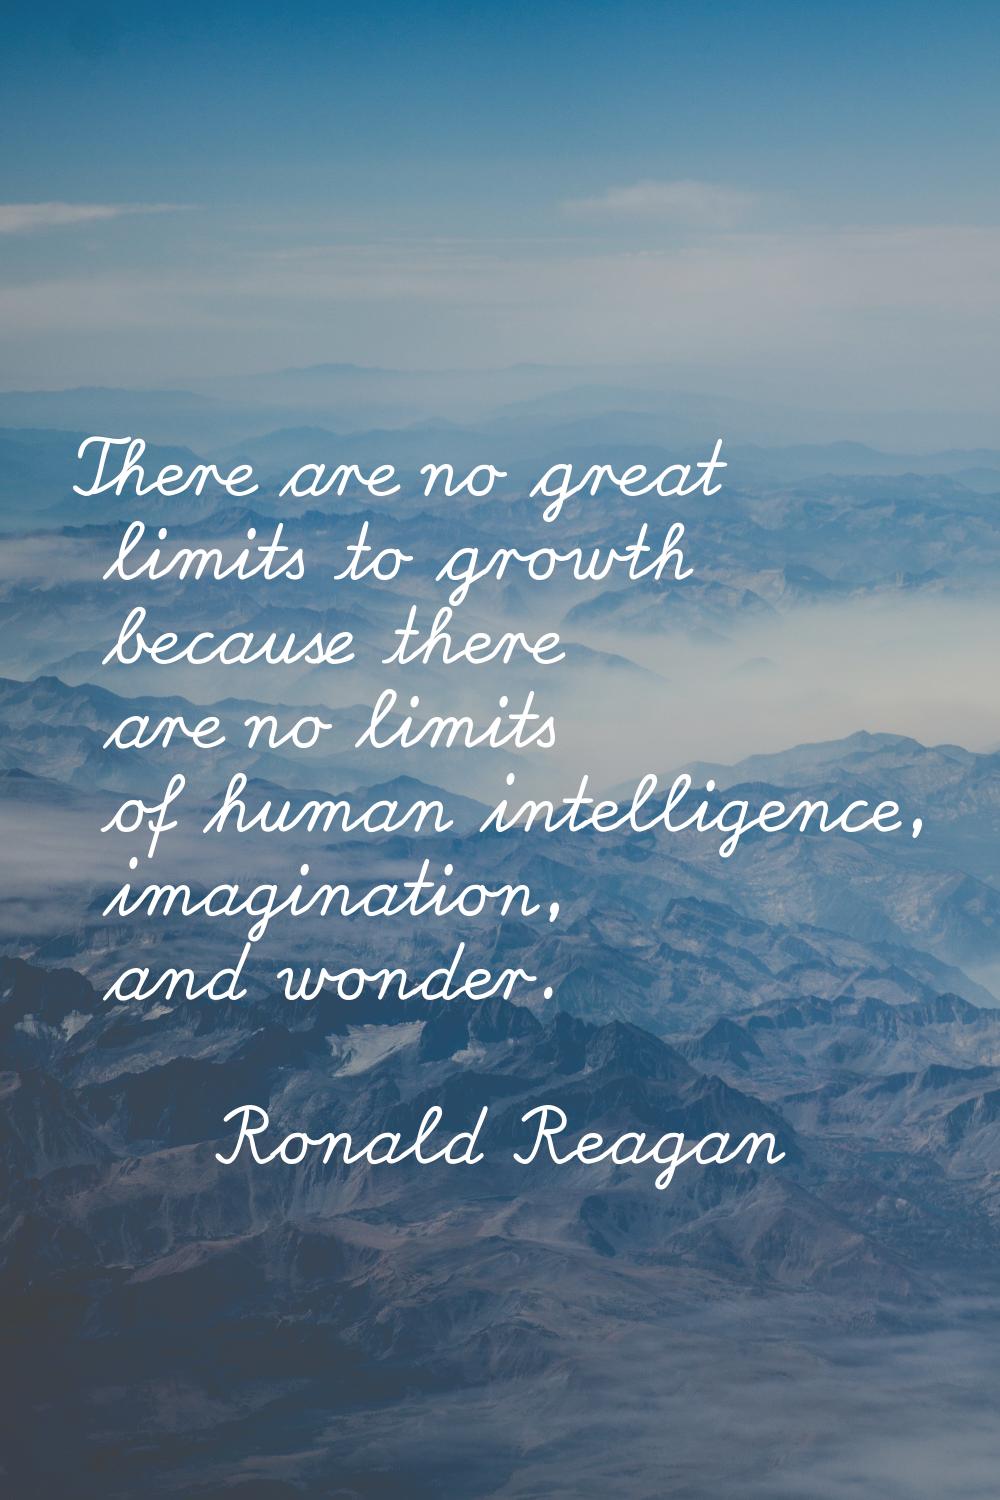 There are no great limits to growth because there are no limits of human intelligence, imagination,